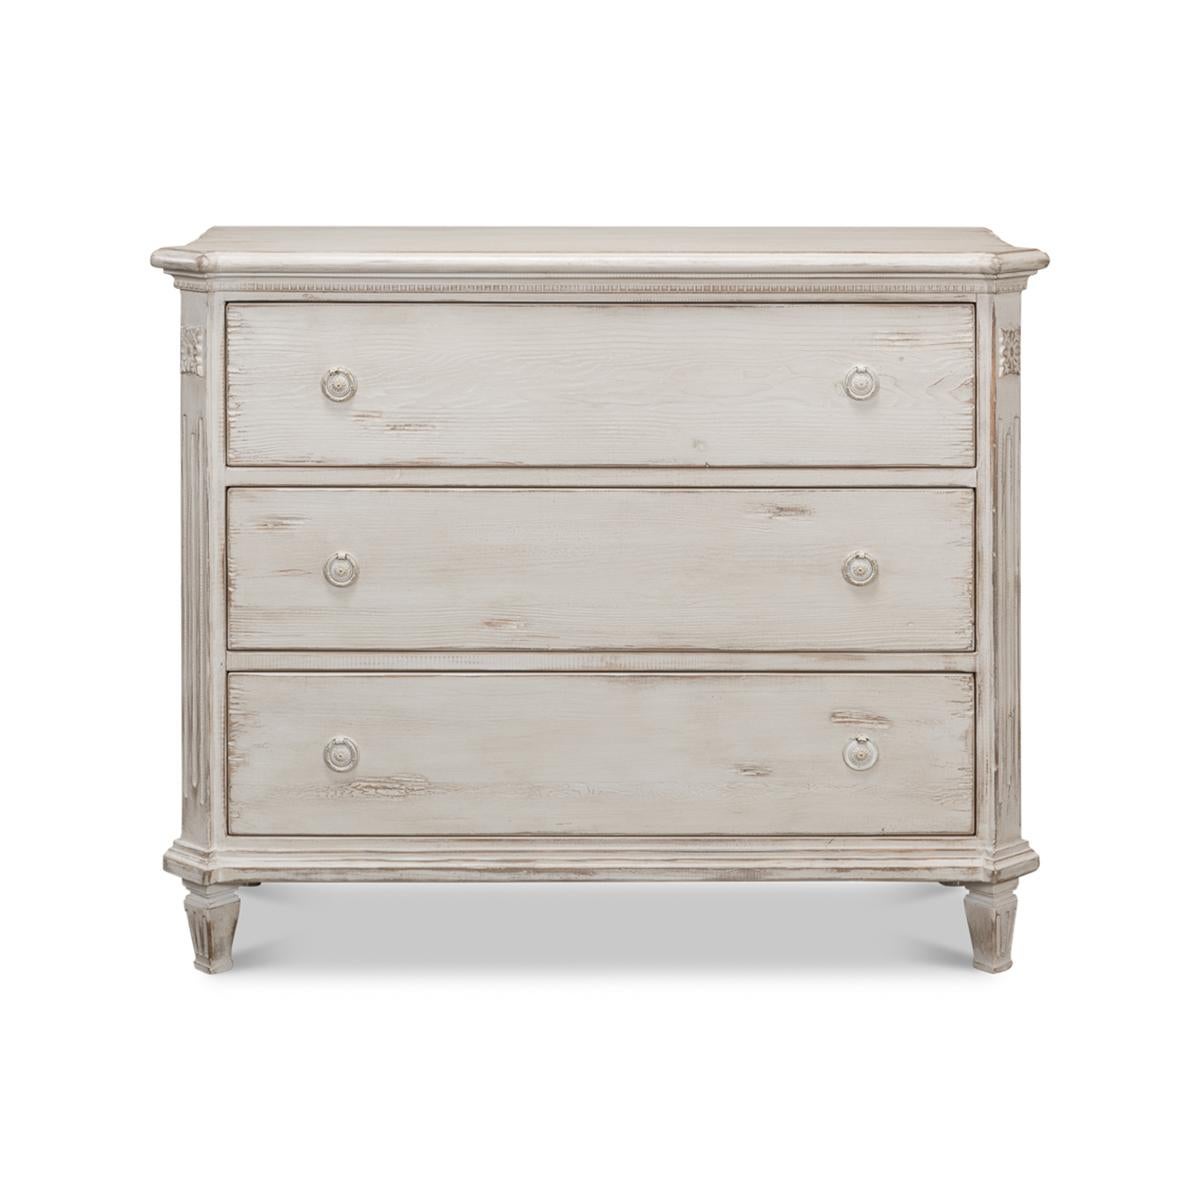 Made with reclaimed pine and finished in a lightly distressed soft gray paint. With a molded edge top having canted corners, fluted styles above square tapered and fluted legs.

Dimensions: 47